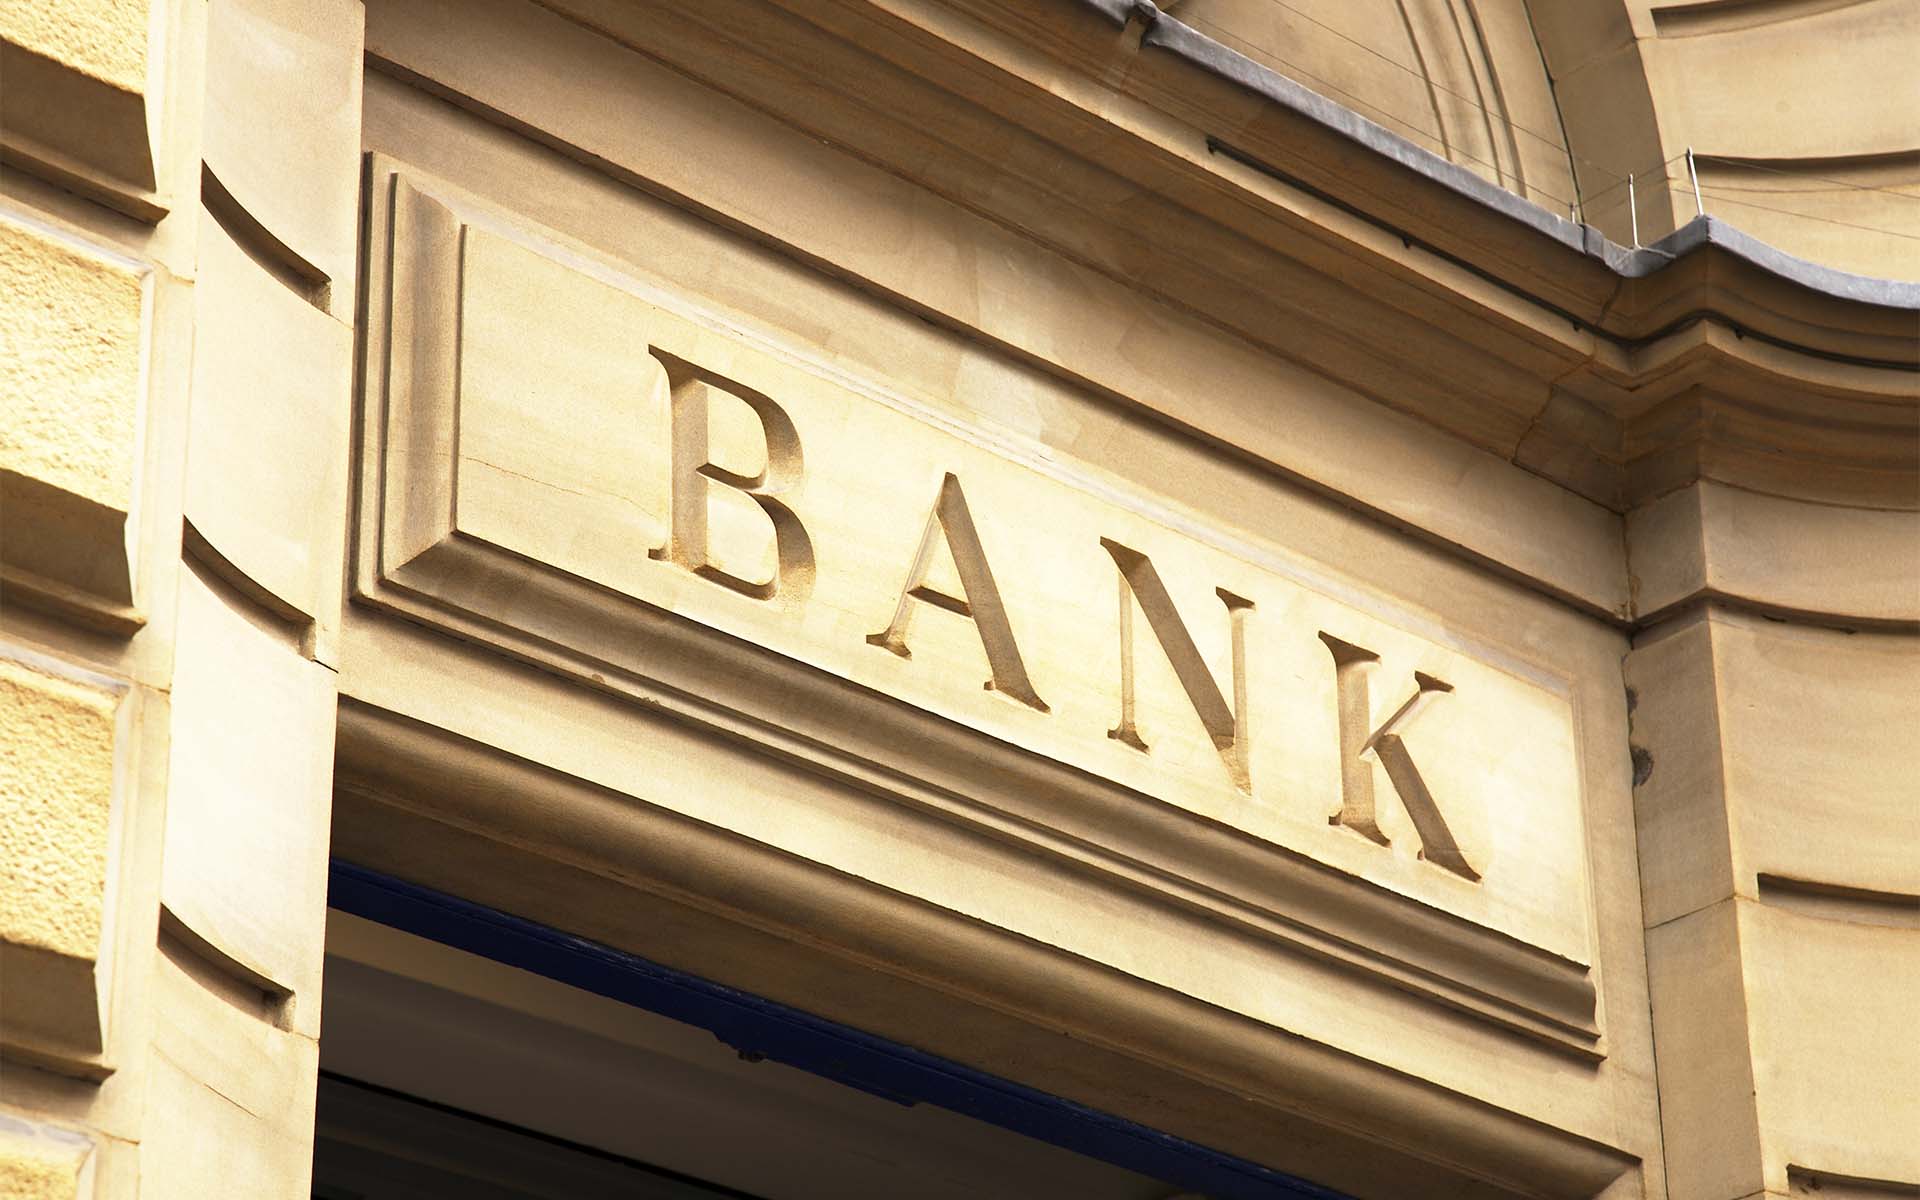  banking only financial your institutions hoard practices 